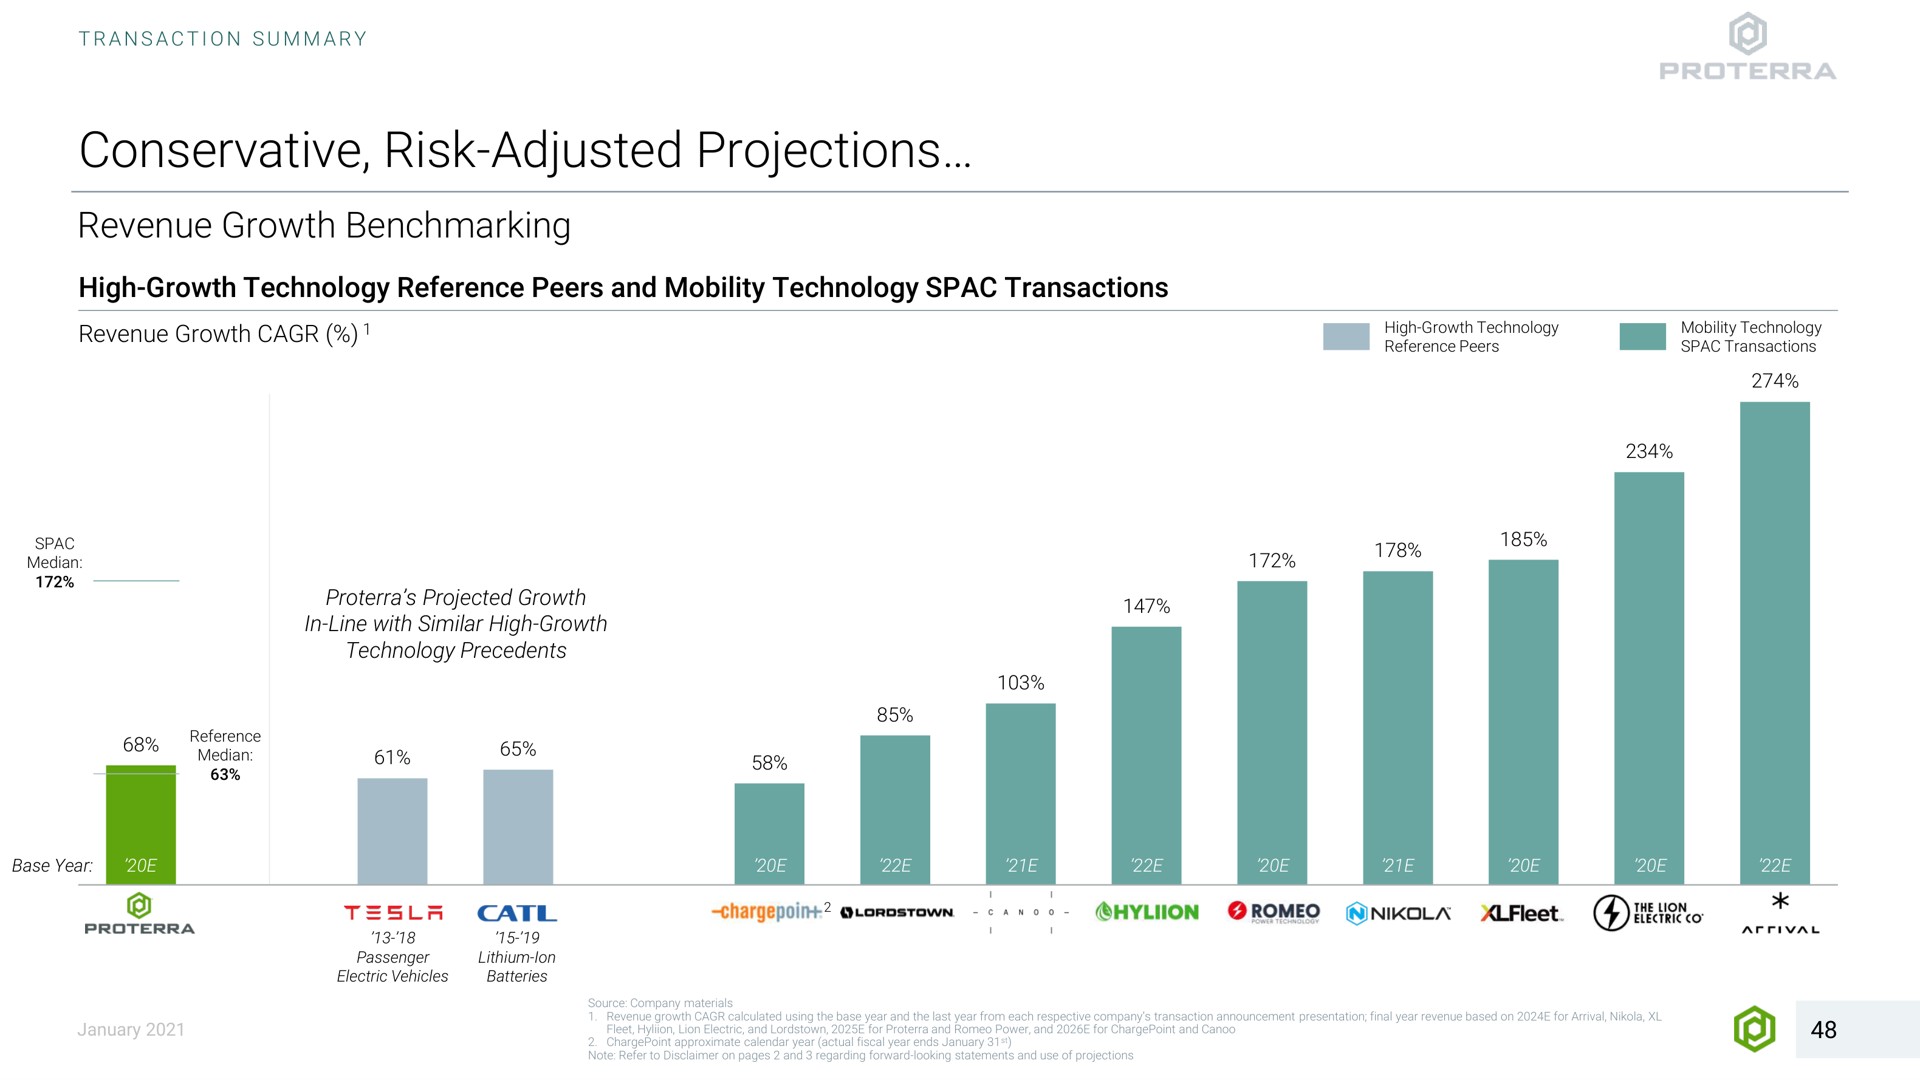 conservative risk adjusted projections revenue growth high growth technology reference peers and mobility technology transactions revenue growth projected growth in line with similar high growth technology precedents ses hem | Proterra